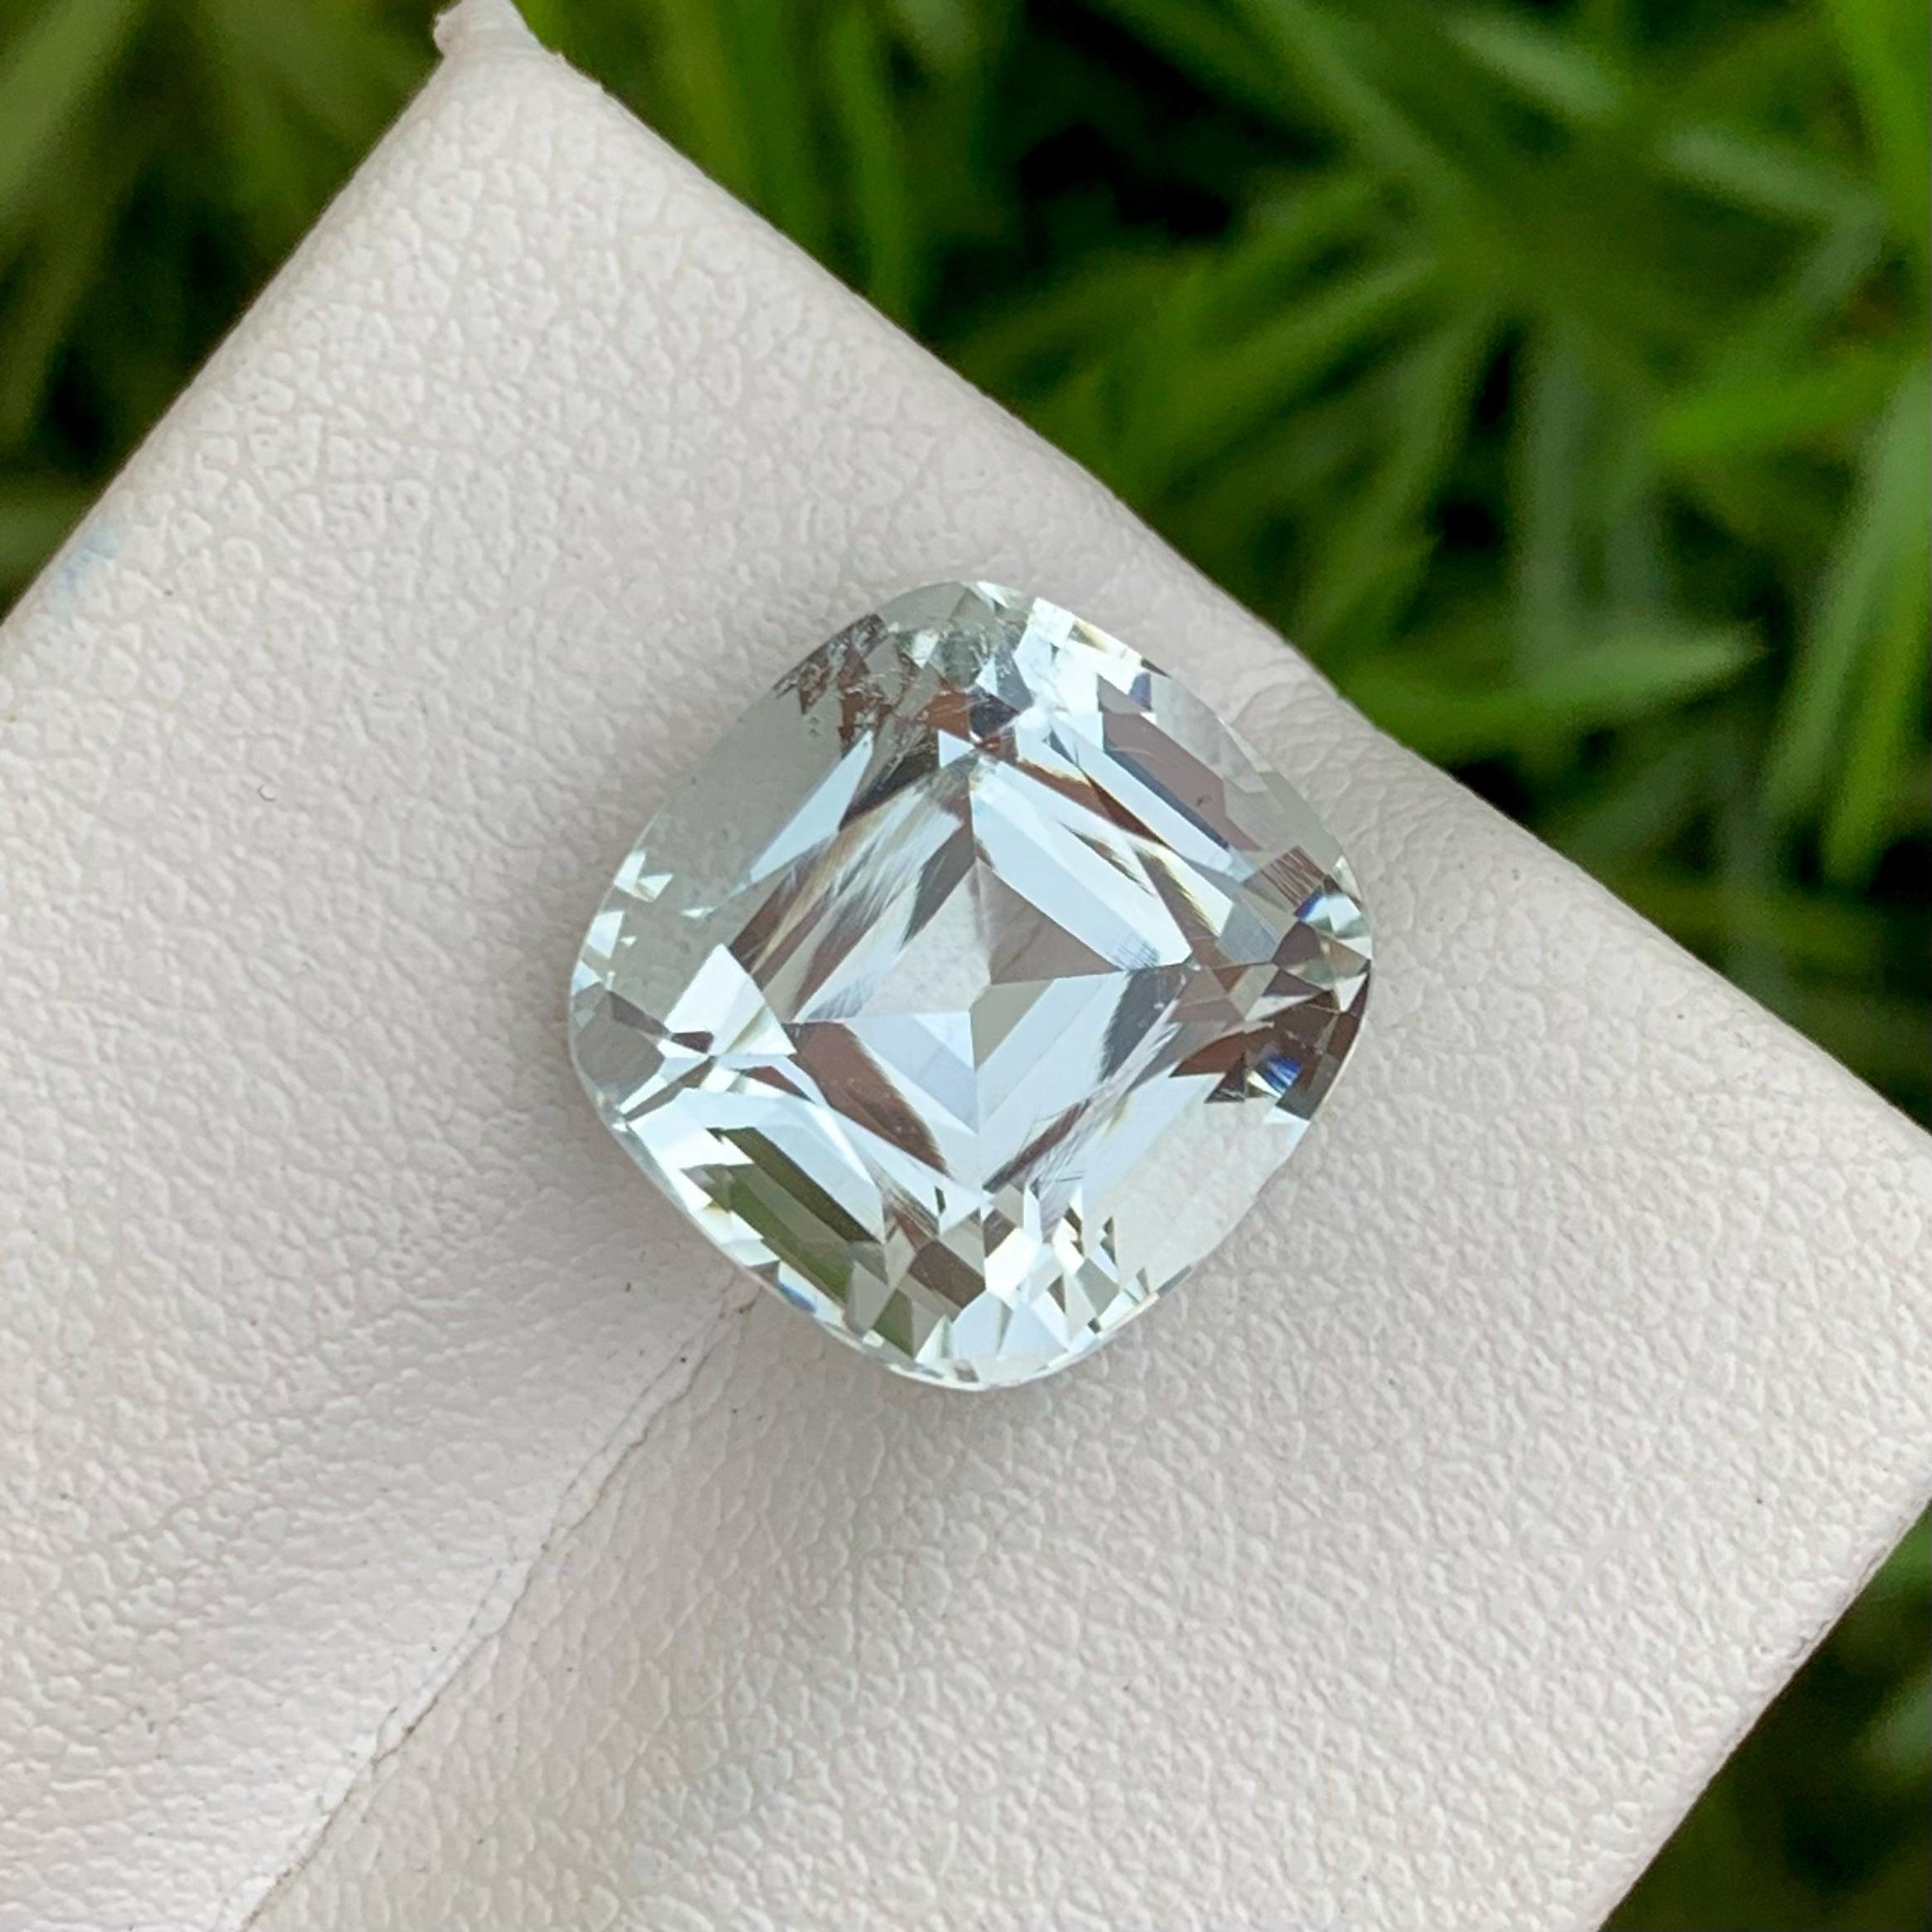 Spectacular Natural Loose Aquamarine Gemstone, available for sale at wholesale price natural high quality 6.65 Carats Cloud VVS Clarity Loose Aquamarine from Pakistan.

Product Information:
GEMSTONE NAME: Spectacular Natural Loose Aquamarine